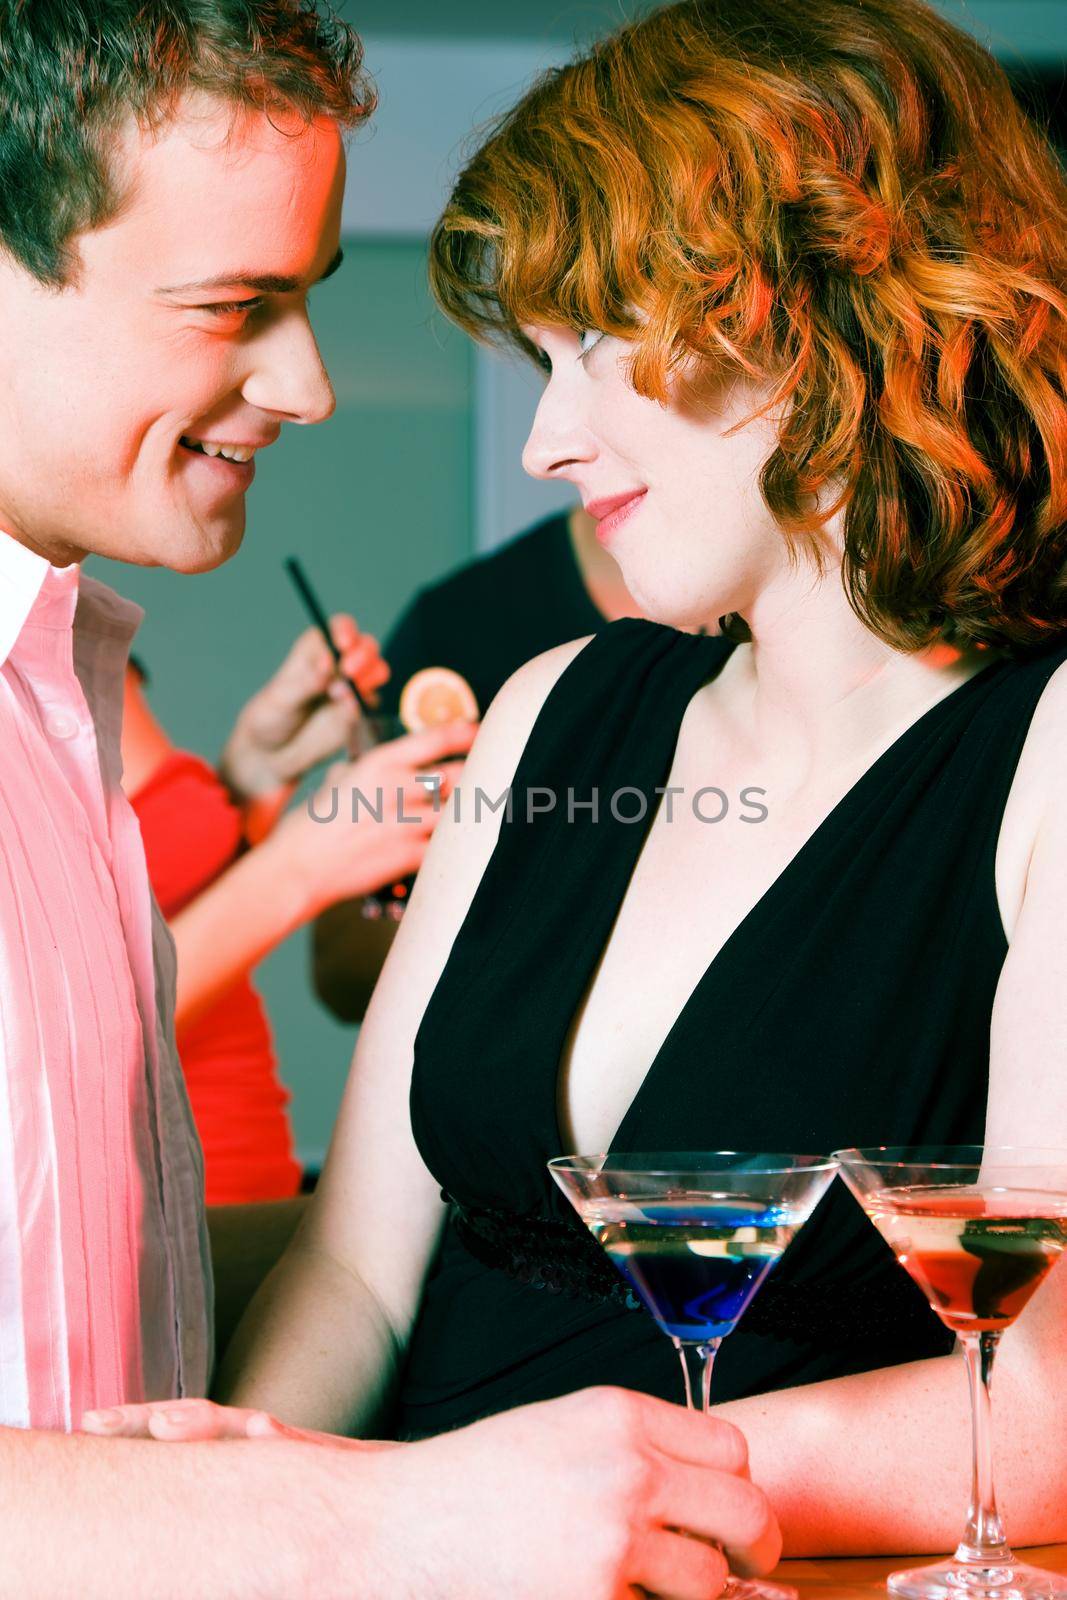 Couple flirting at a party by Kzenon